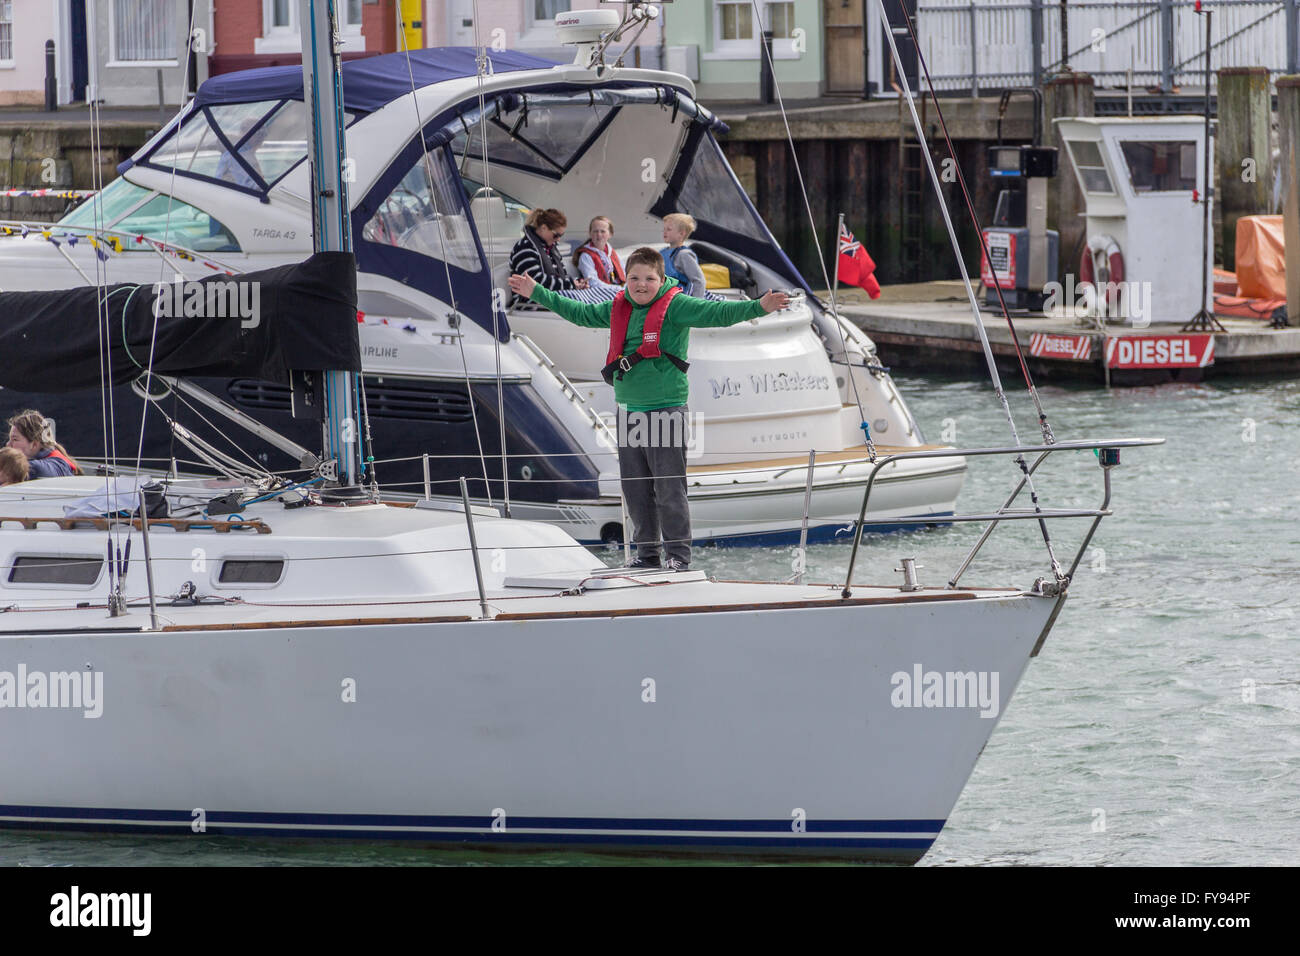 Weymouth, England. 23 April 2016. Queen's 90th Birthday Floating Tribute. Boy in green on boat. Credit:  Frances Underwood/Alamy Live News Stock Photo